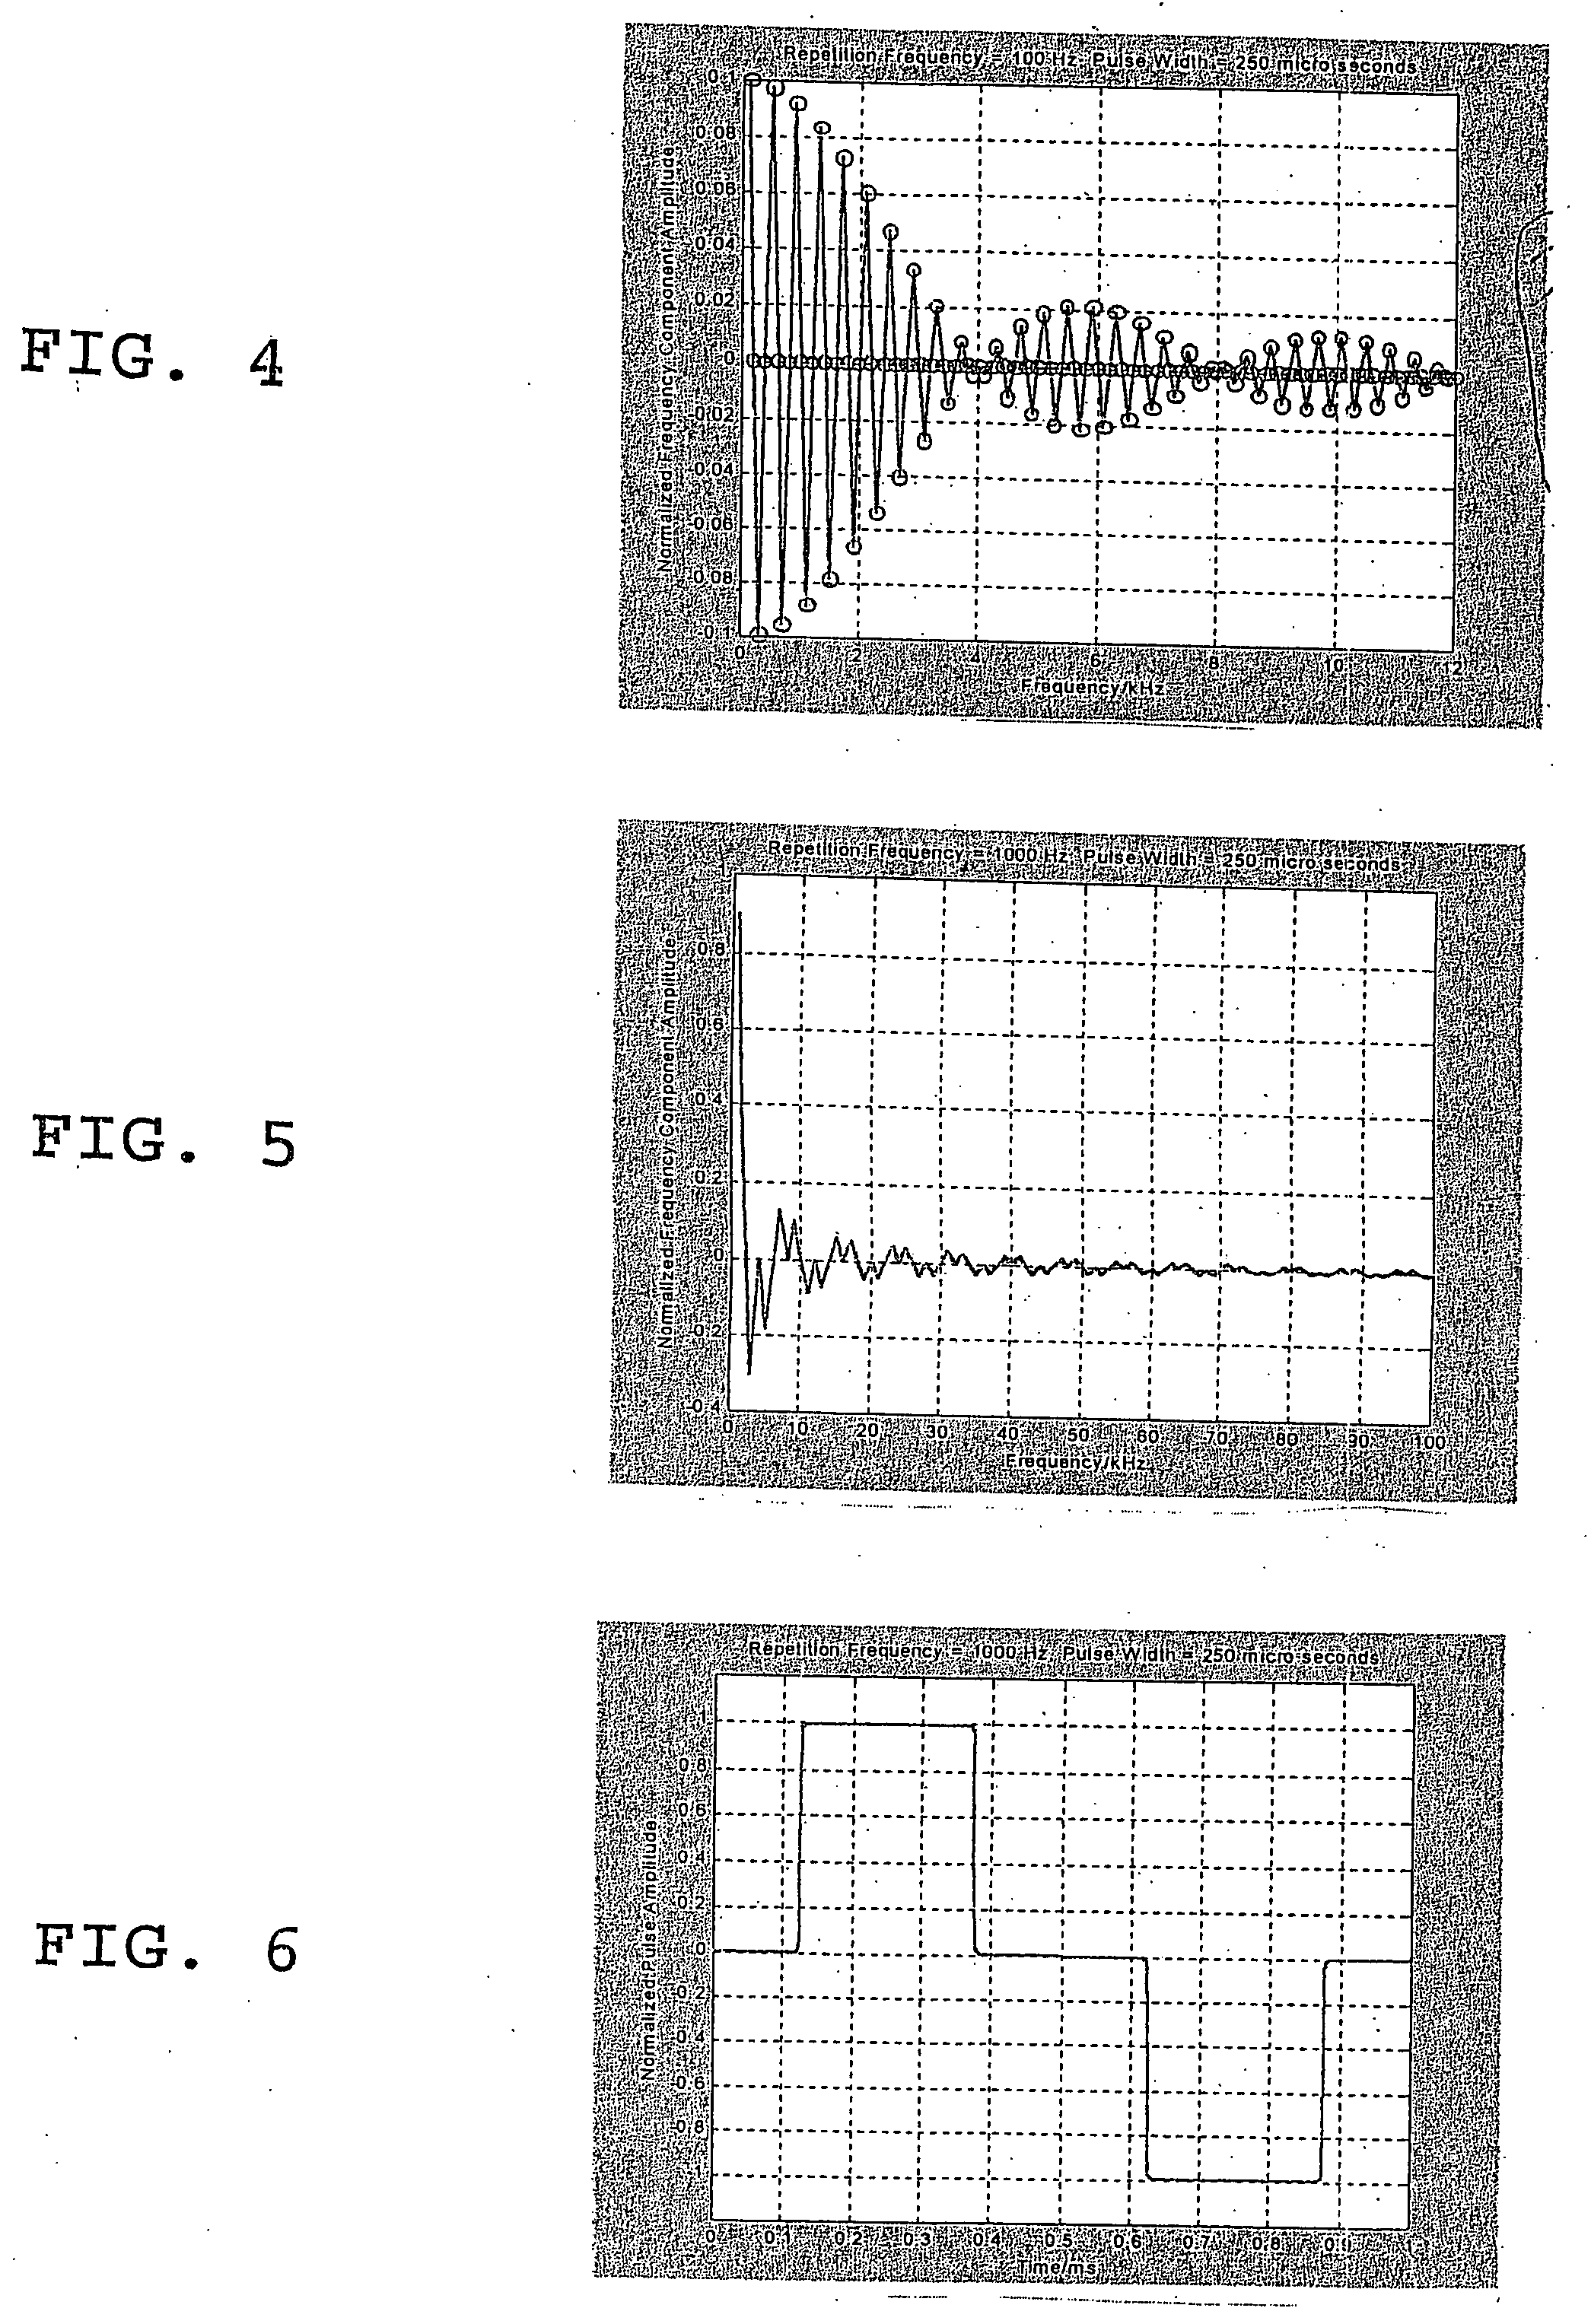 Procedure and machine for electro-inducing/stimulating deep layered muscle contractions using a biphasic faradic pulse sequence